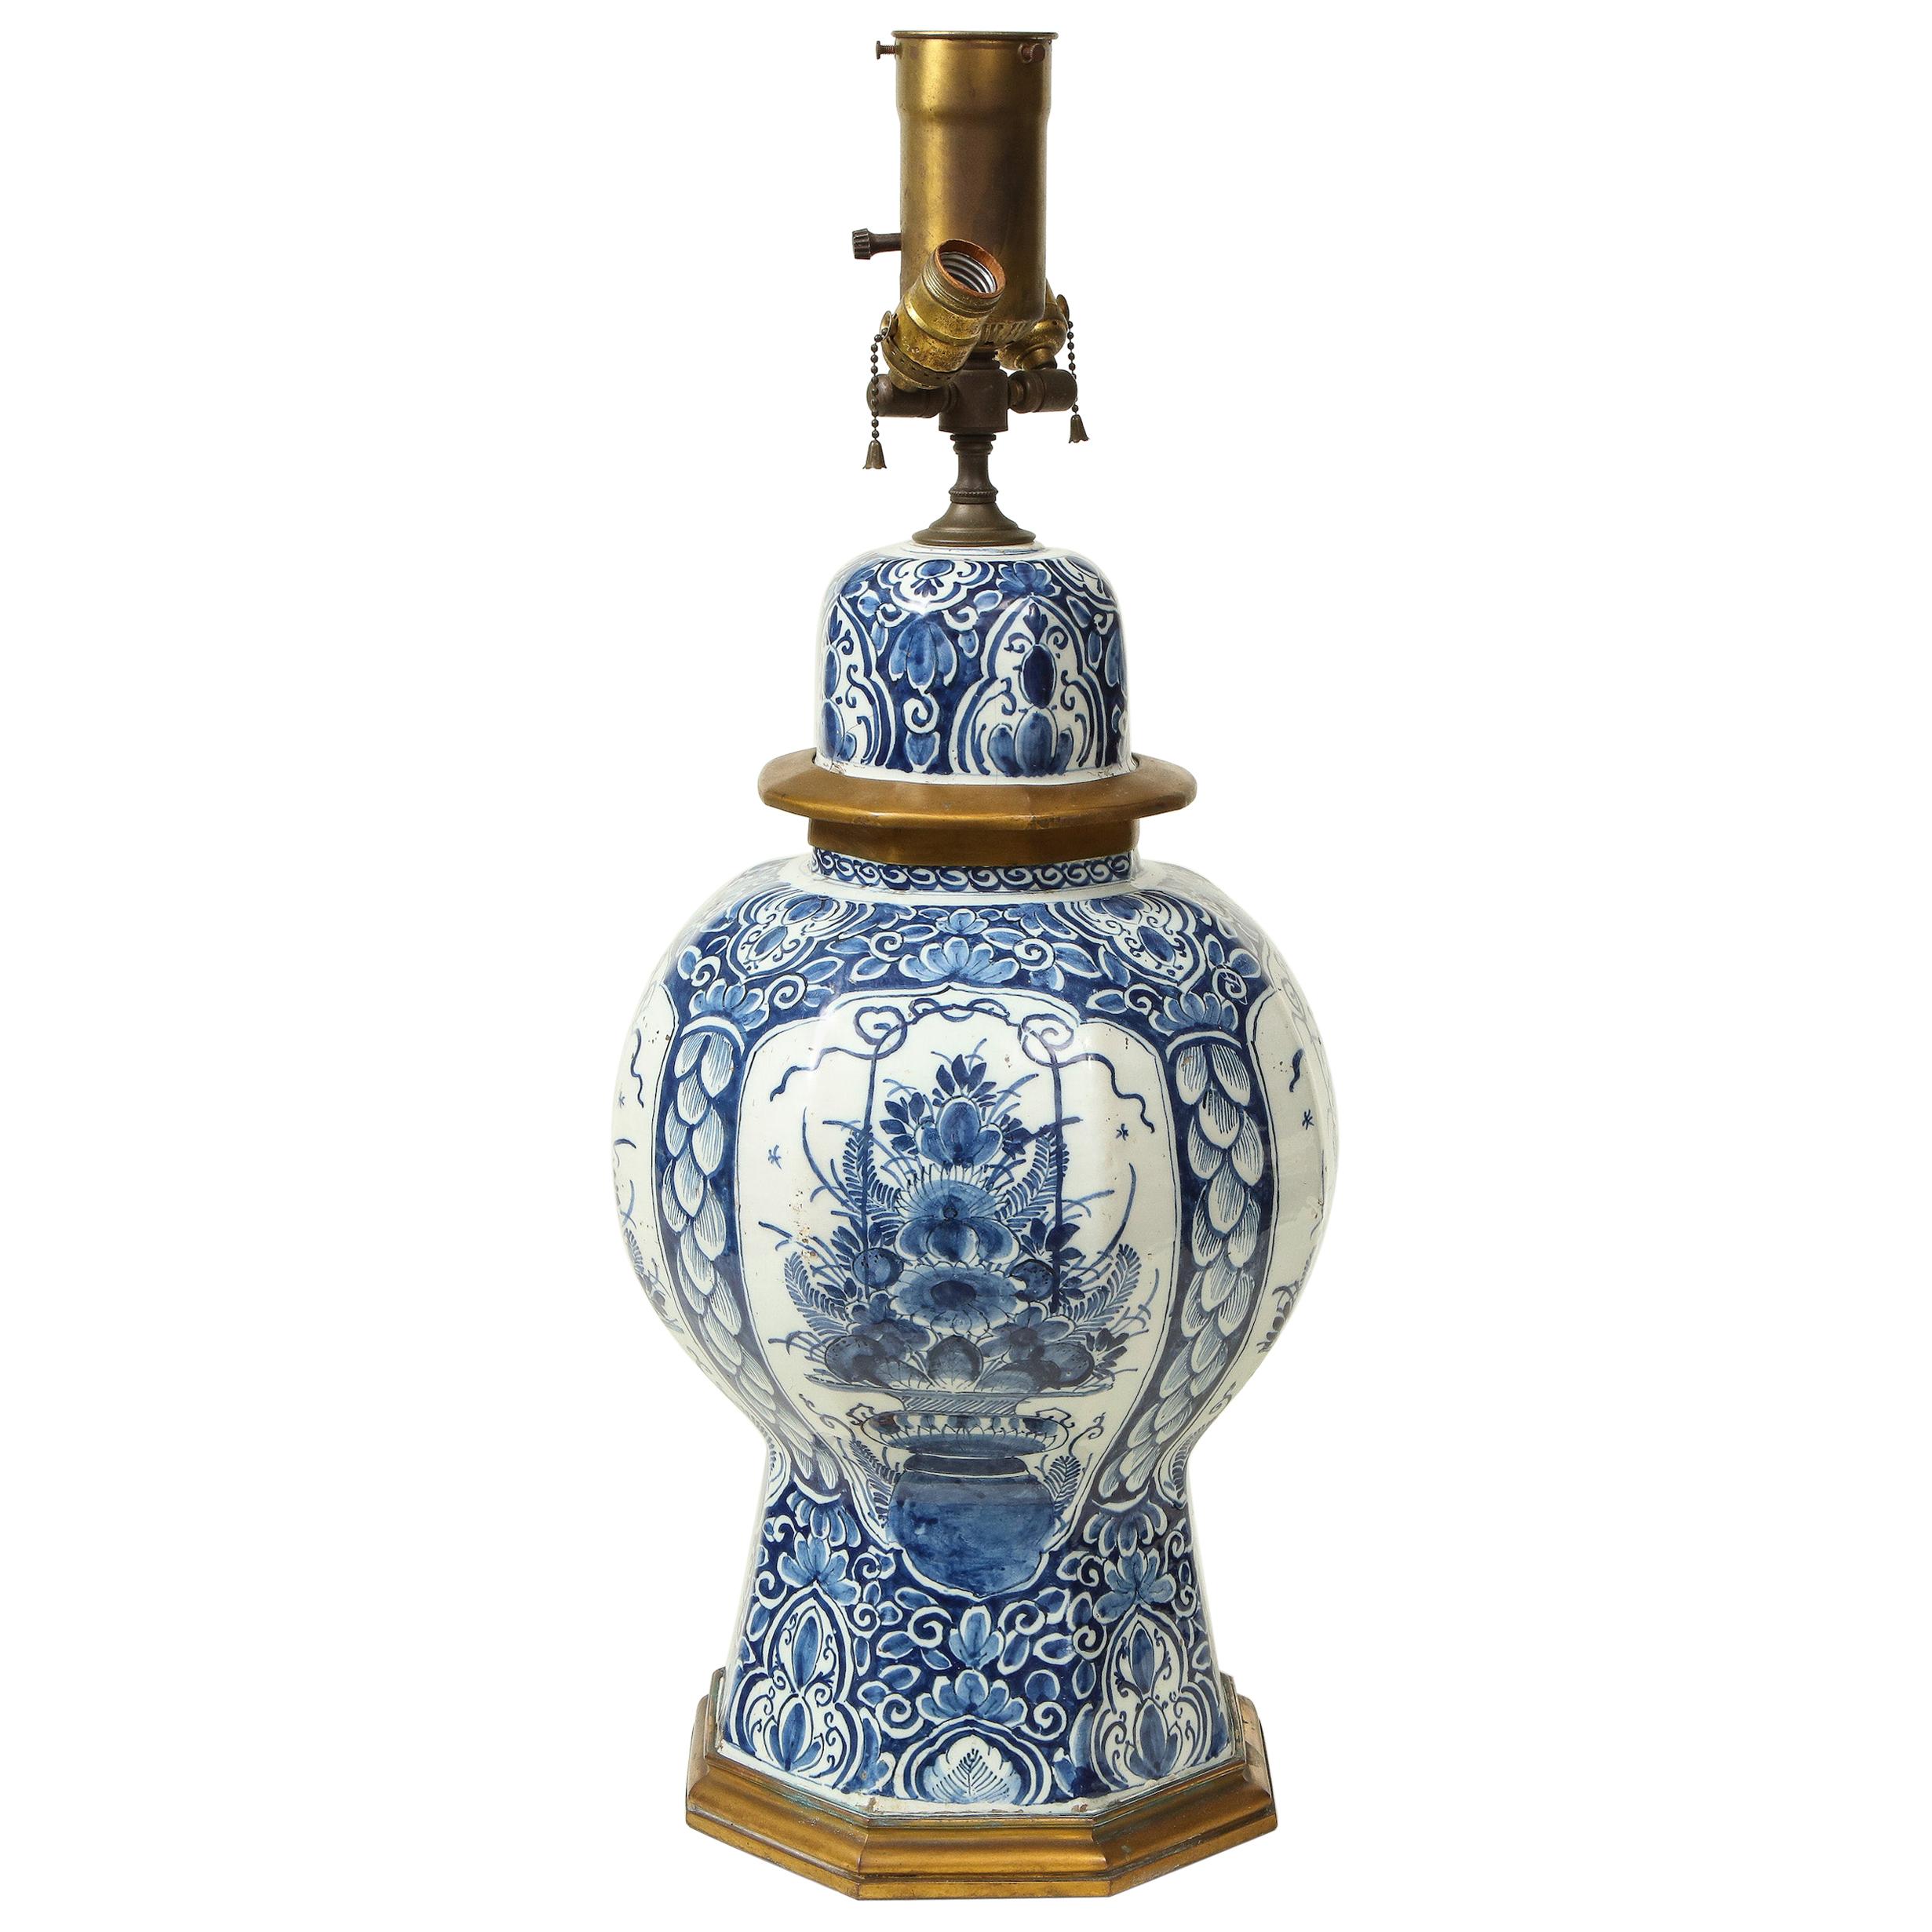 Large Delft Blue and White Ceramic Ginger Jar Mounted as a Table Lamp